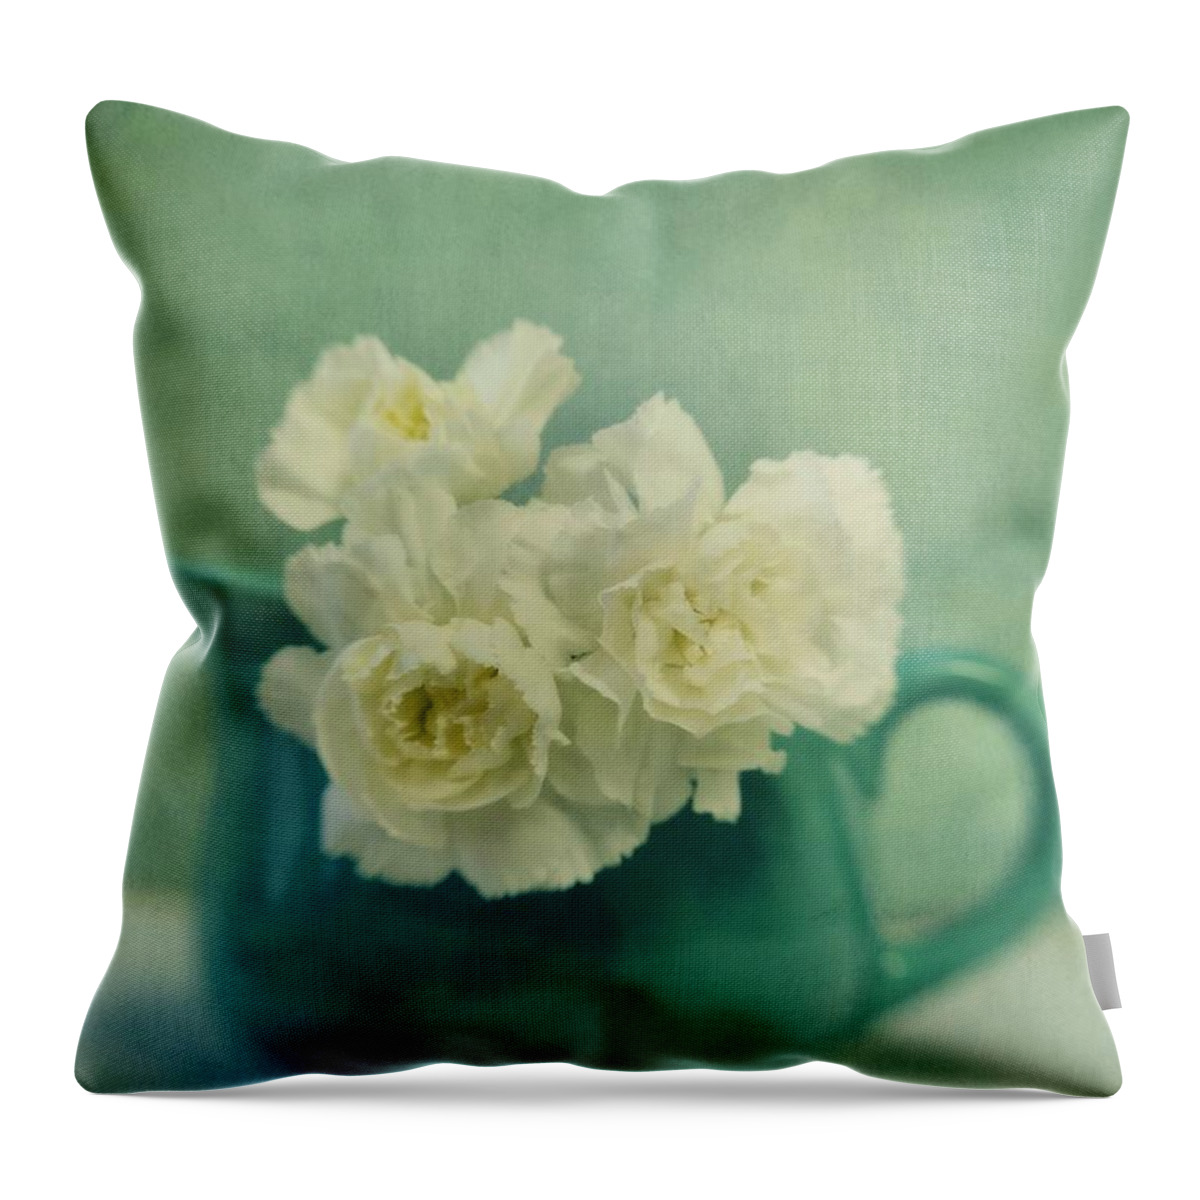 Carnation Throw Pillow featuring the photograph Carnations In A Jar by Priska Wettstein